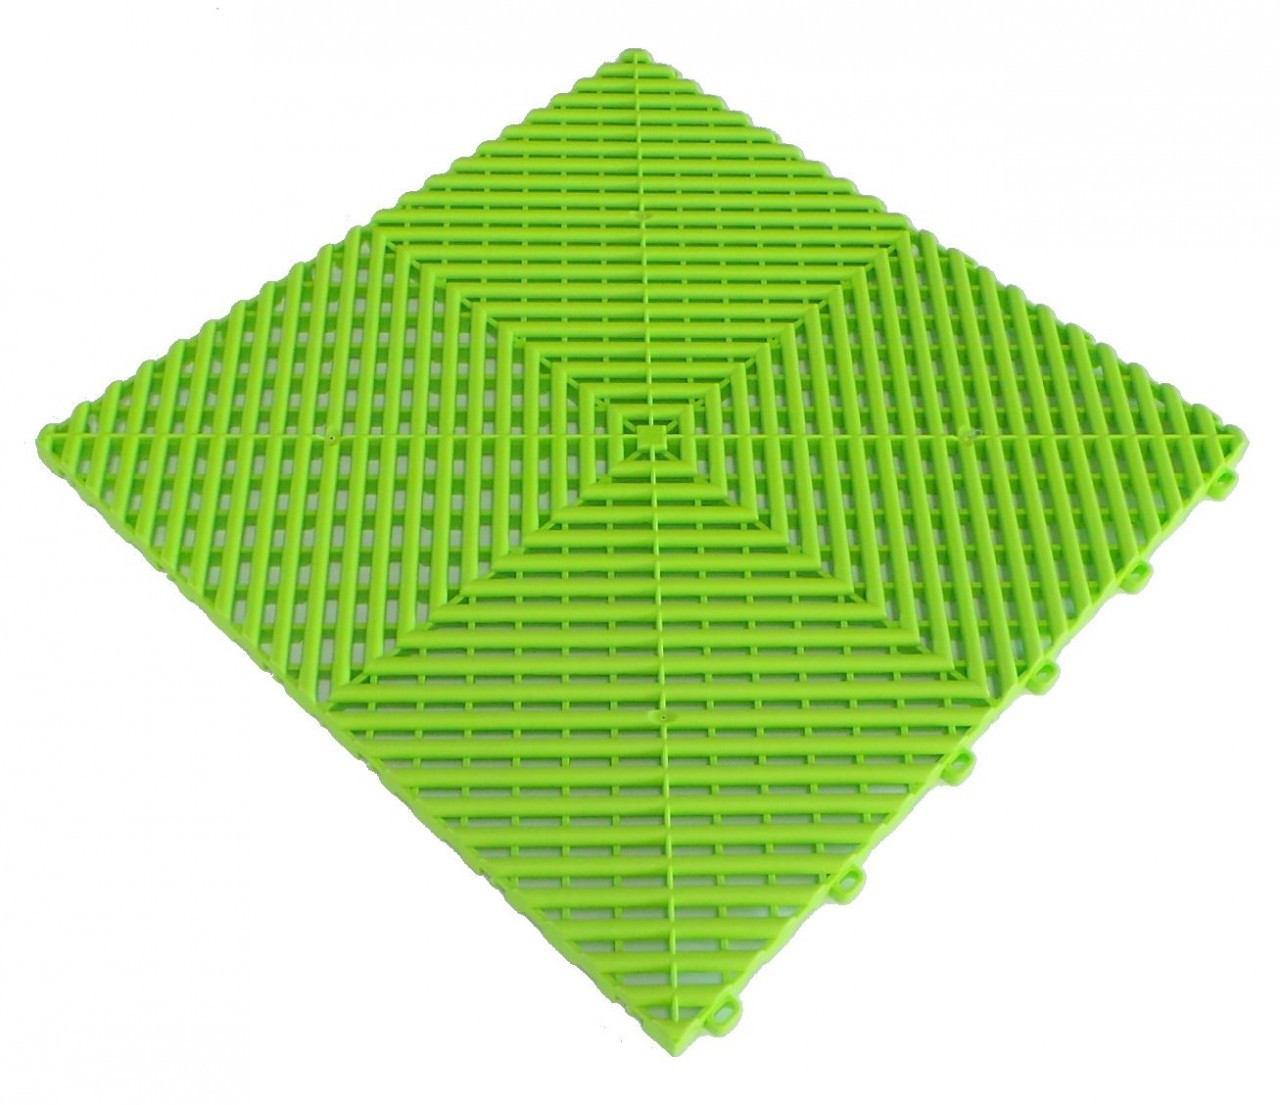 Ribtrax Pro SPECIAL"Techno Green" Tiles (6-Pack) Tile Size: 15 3/4" x 15 3/4" (1 Tile = 1.72 sq ft)